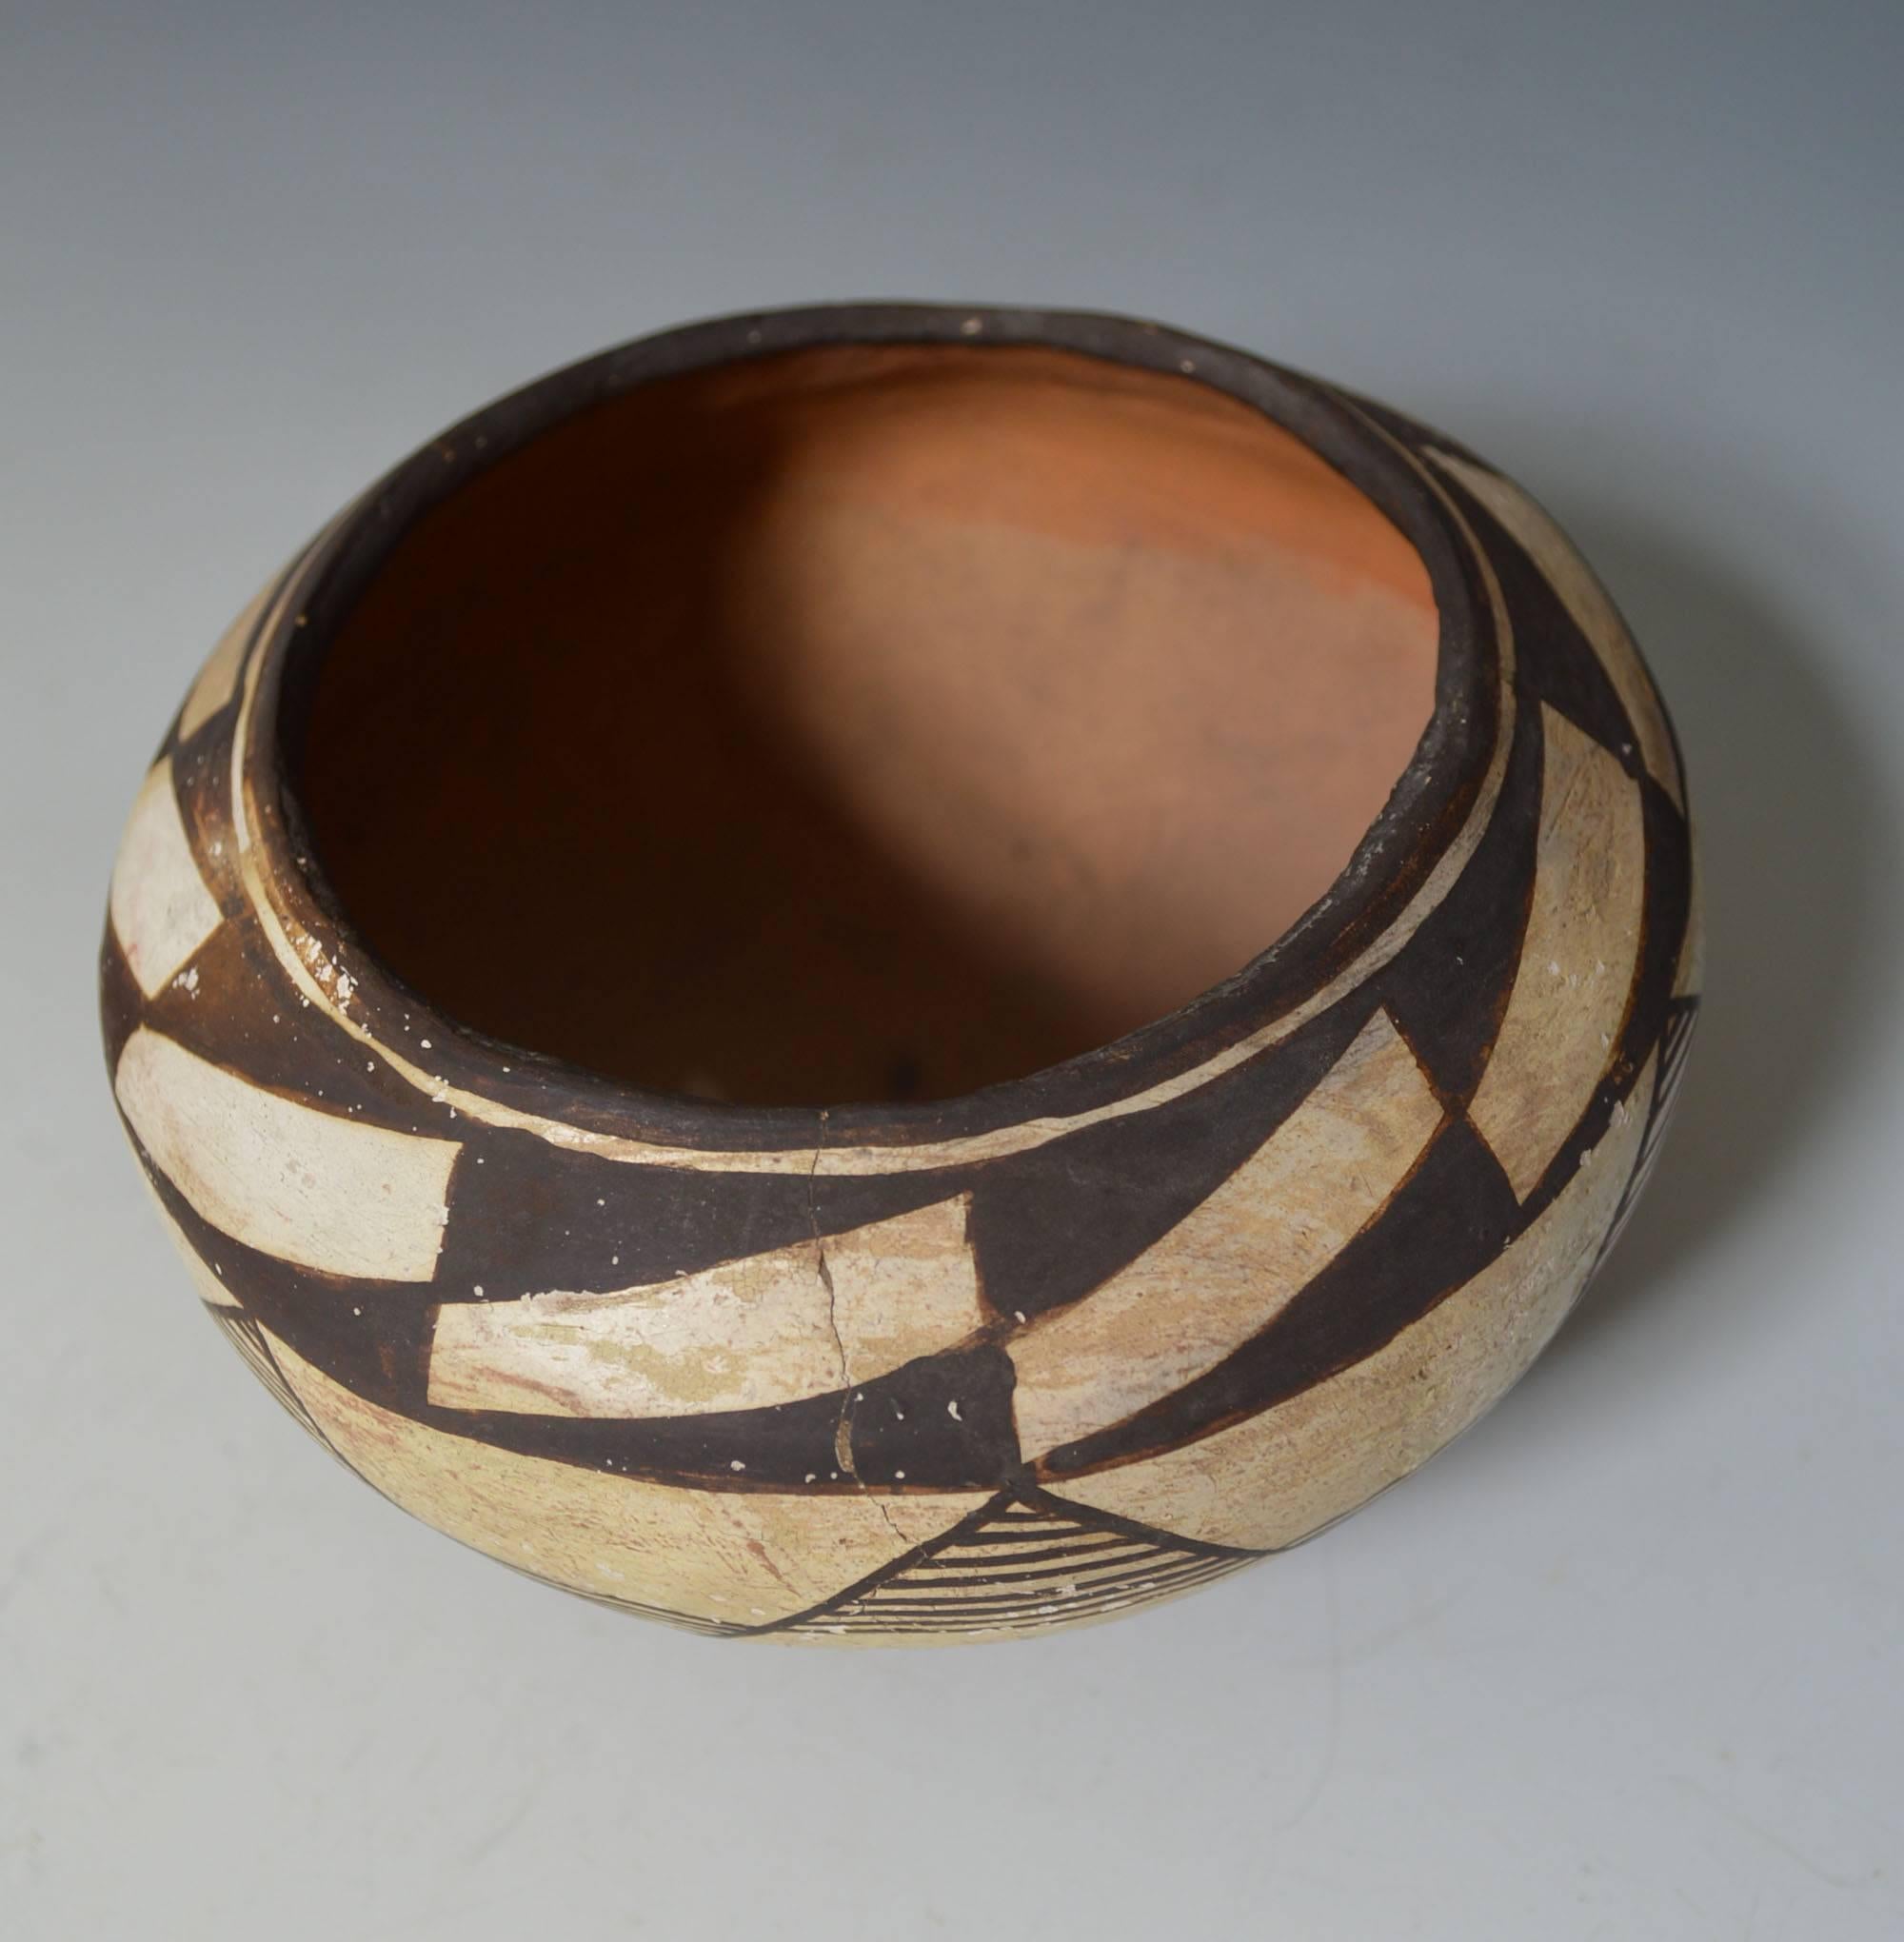 Native American Indian fine vintage Acoma pottery bowl
Cream and white with geometric design
Period 1960 or earlier
Size: width 6 inches, height 4 1/2 inches,
Condition: one small stable hair line going few inches down from rim


Size 10.5 x